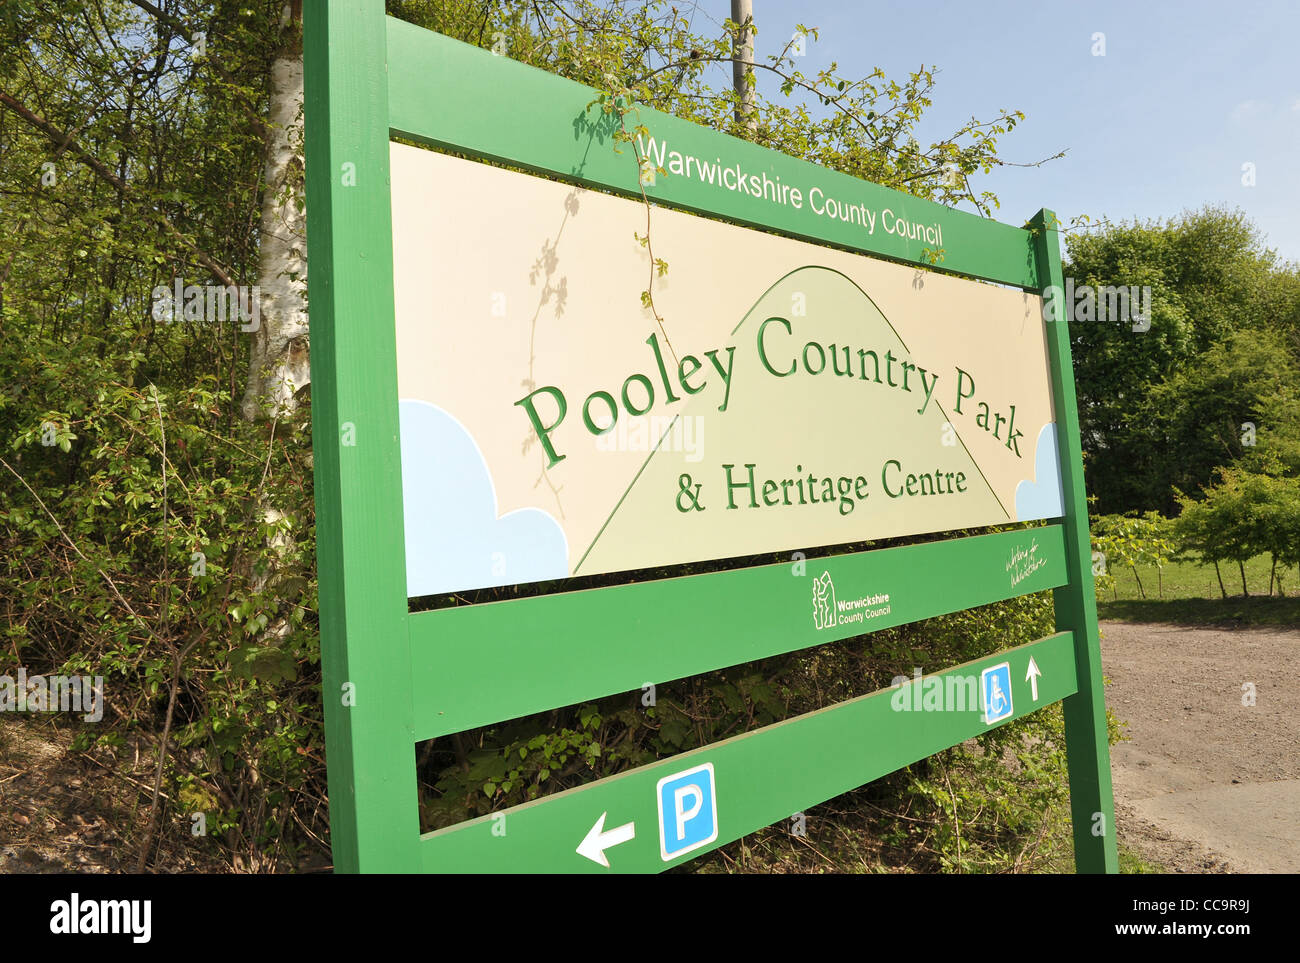 Entrance sign to Pooley Country Park in North Warwickshire, England Stock Photo